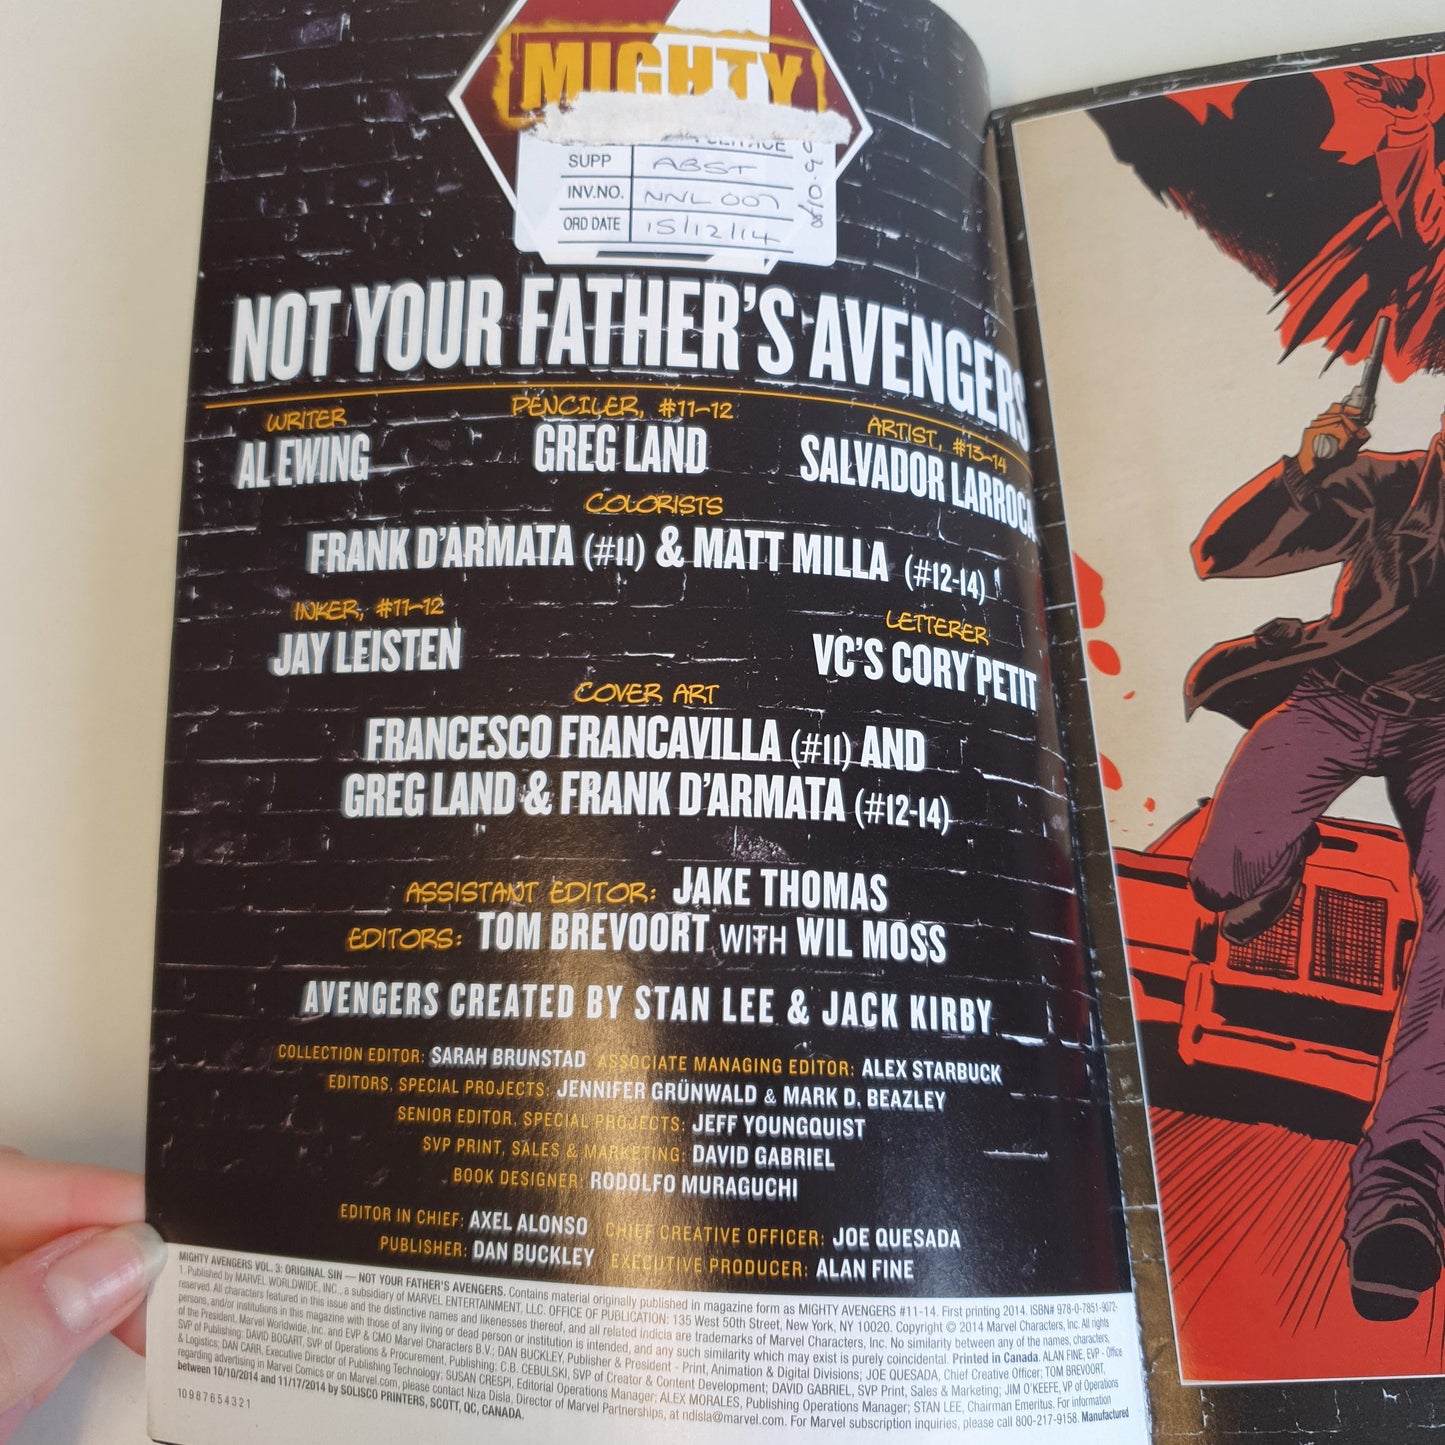 Mighty Avengers Original Sin &Not Your Father's Avengers by Ewing, Land & Larroca (2014)